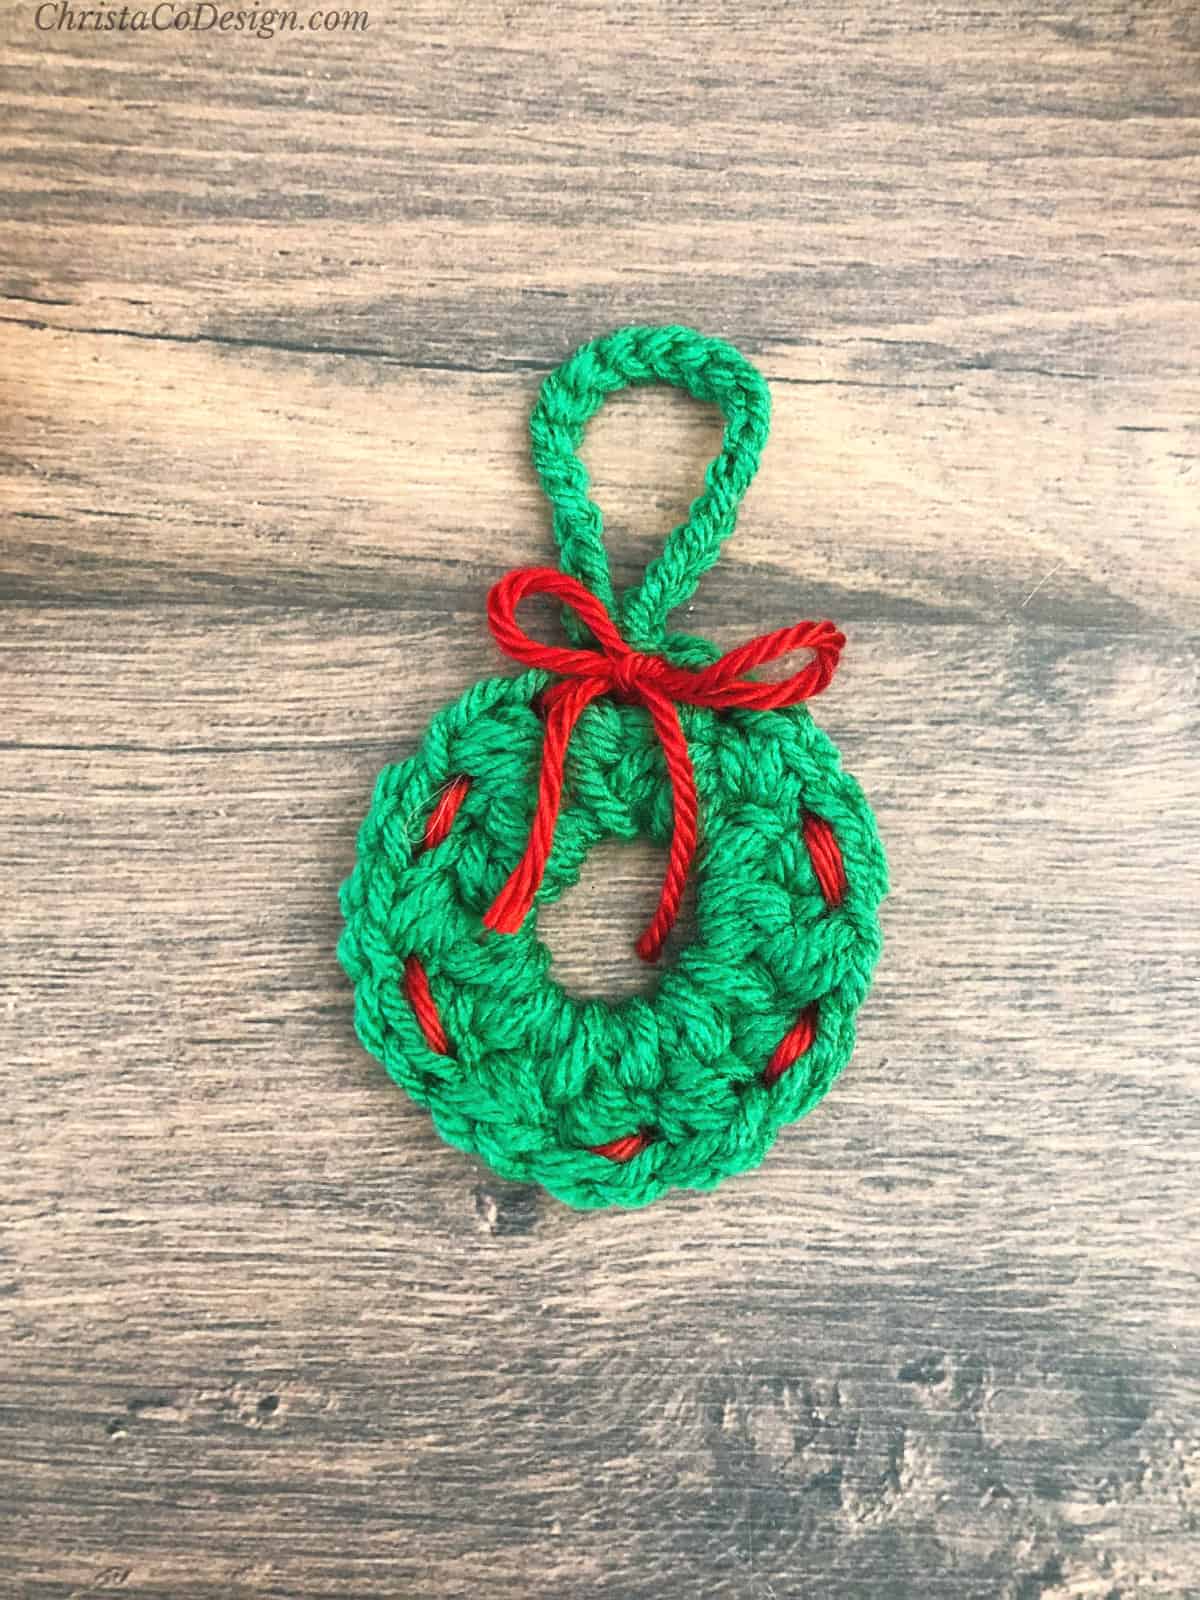 Green crochet wreath ornament with red bow on wood table.